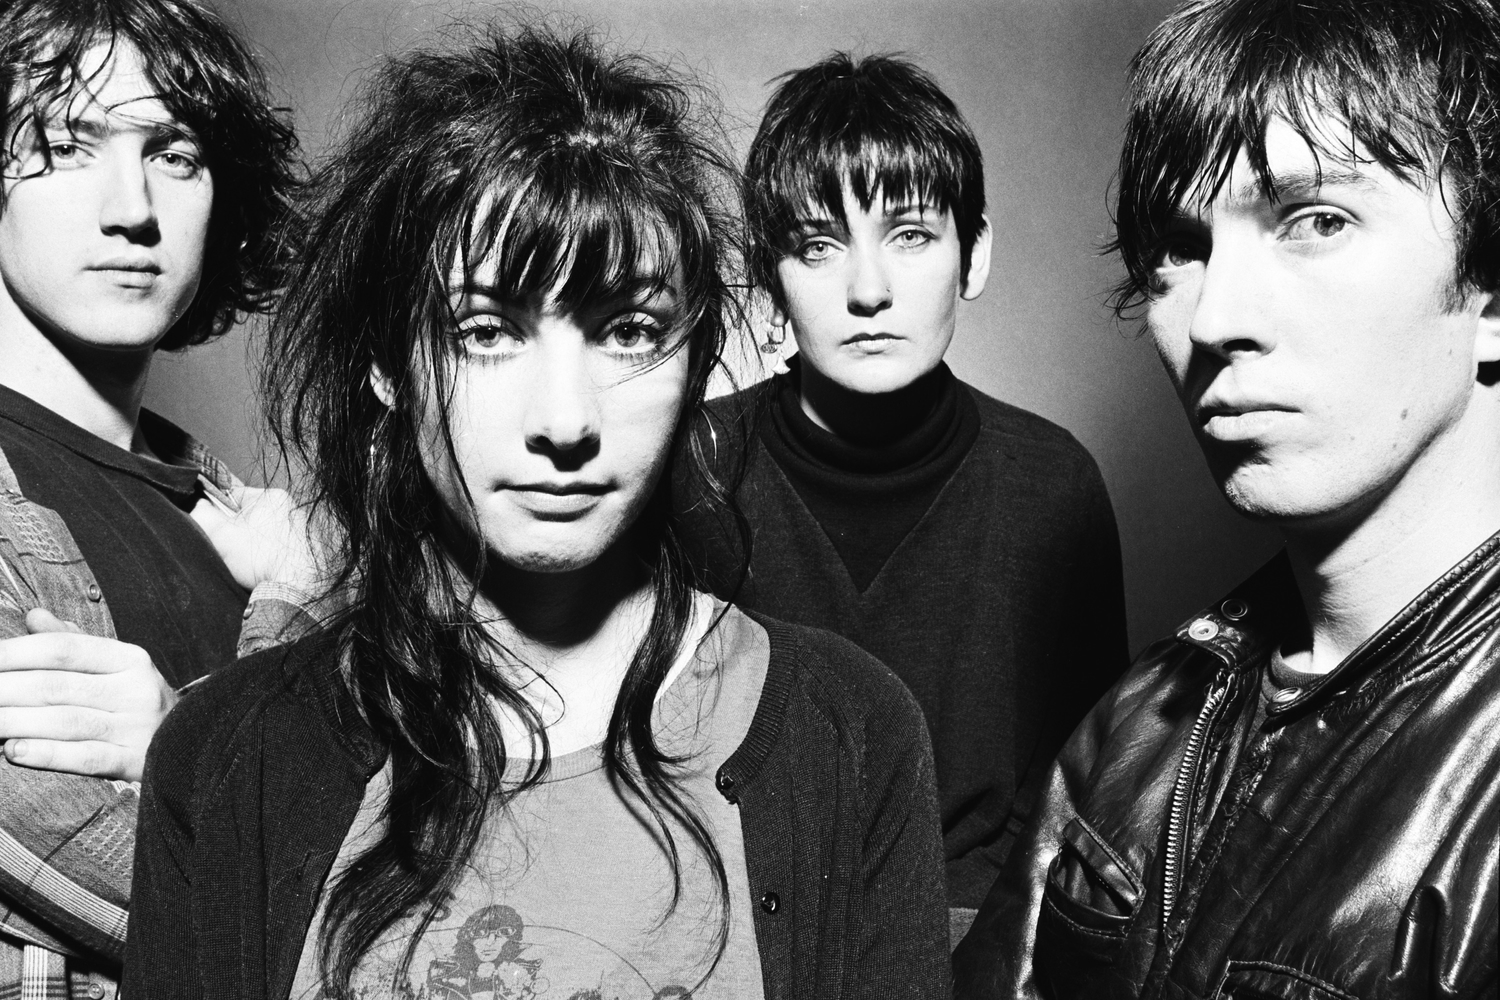 Watch My Bloody Valentine play a new song at Meltdown Festival